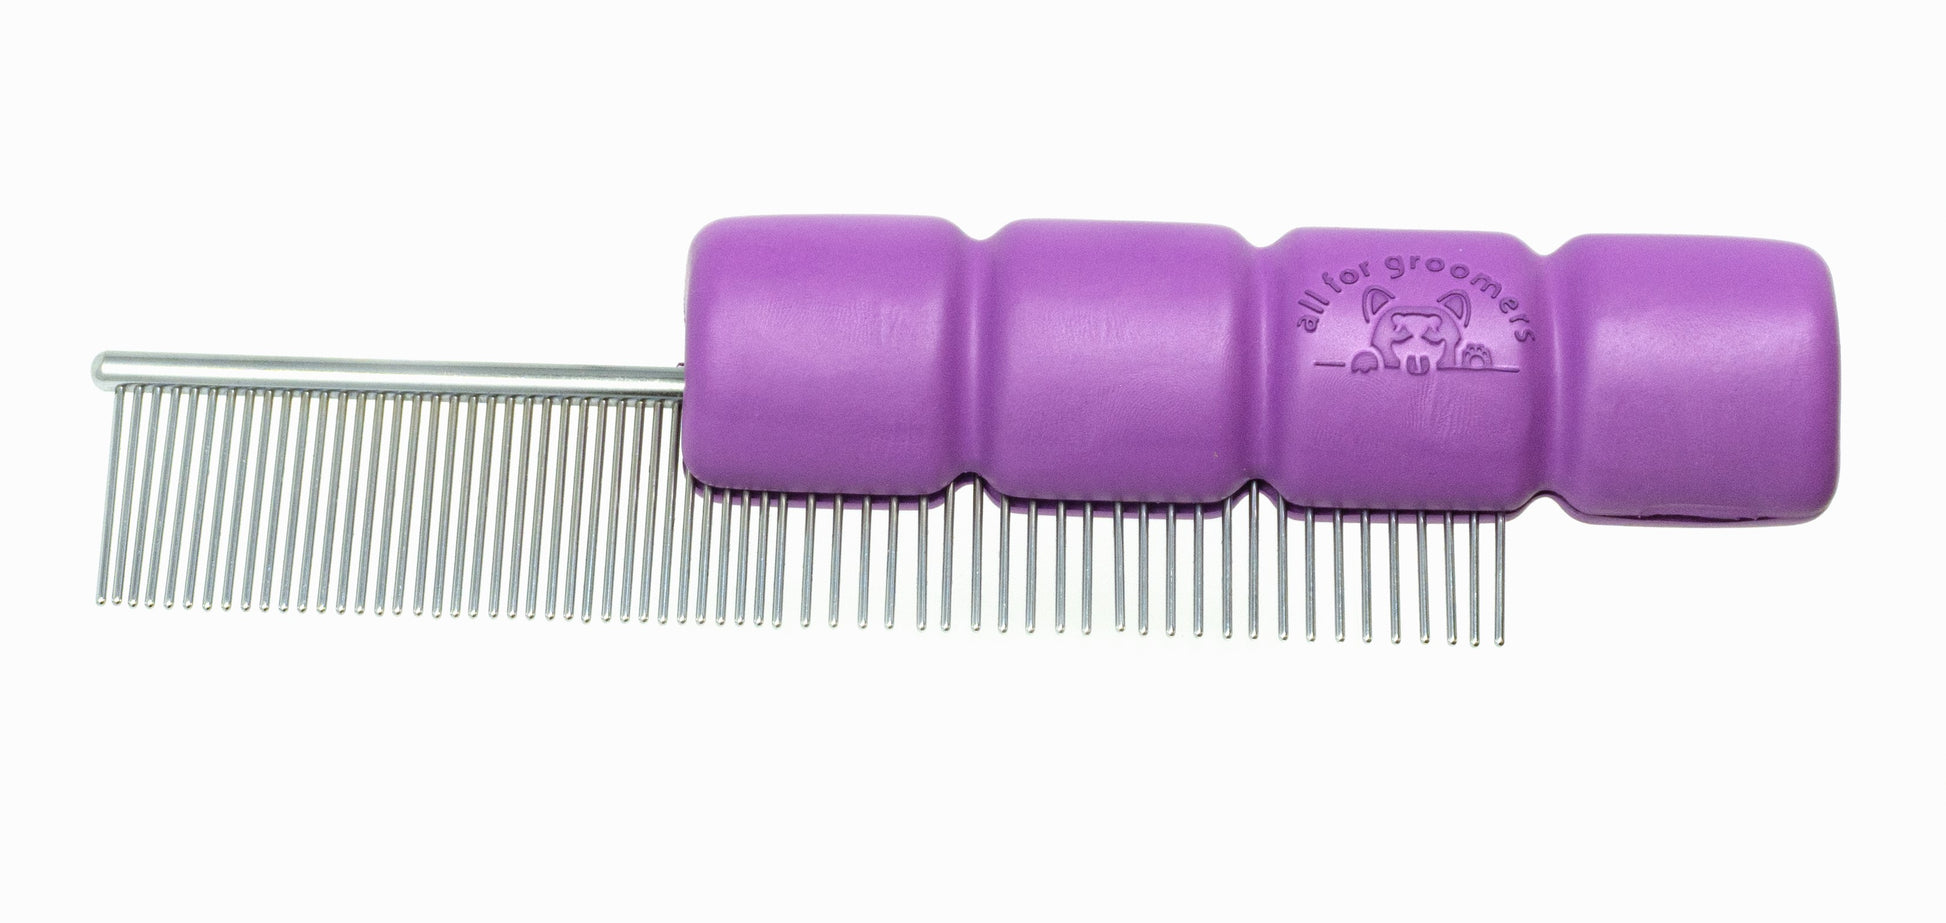 The Hand Saver® is a light weight ergonomic comb handle using soft  TPU which slides onto most straight and curved combs and quickly peels off to use again. This product boosts your grip, avoiding slips reduces hand strain and is light weight. Used for table or tub. 